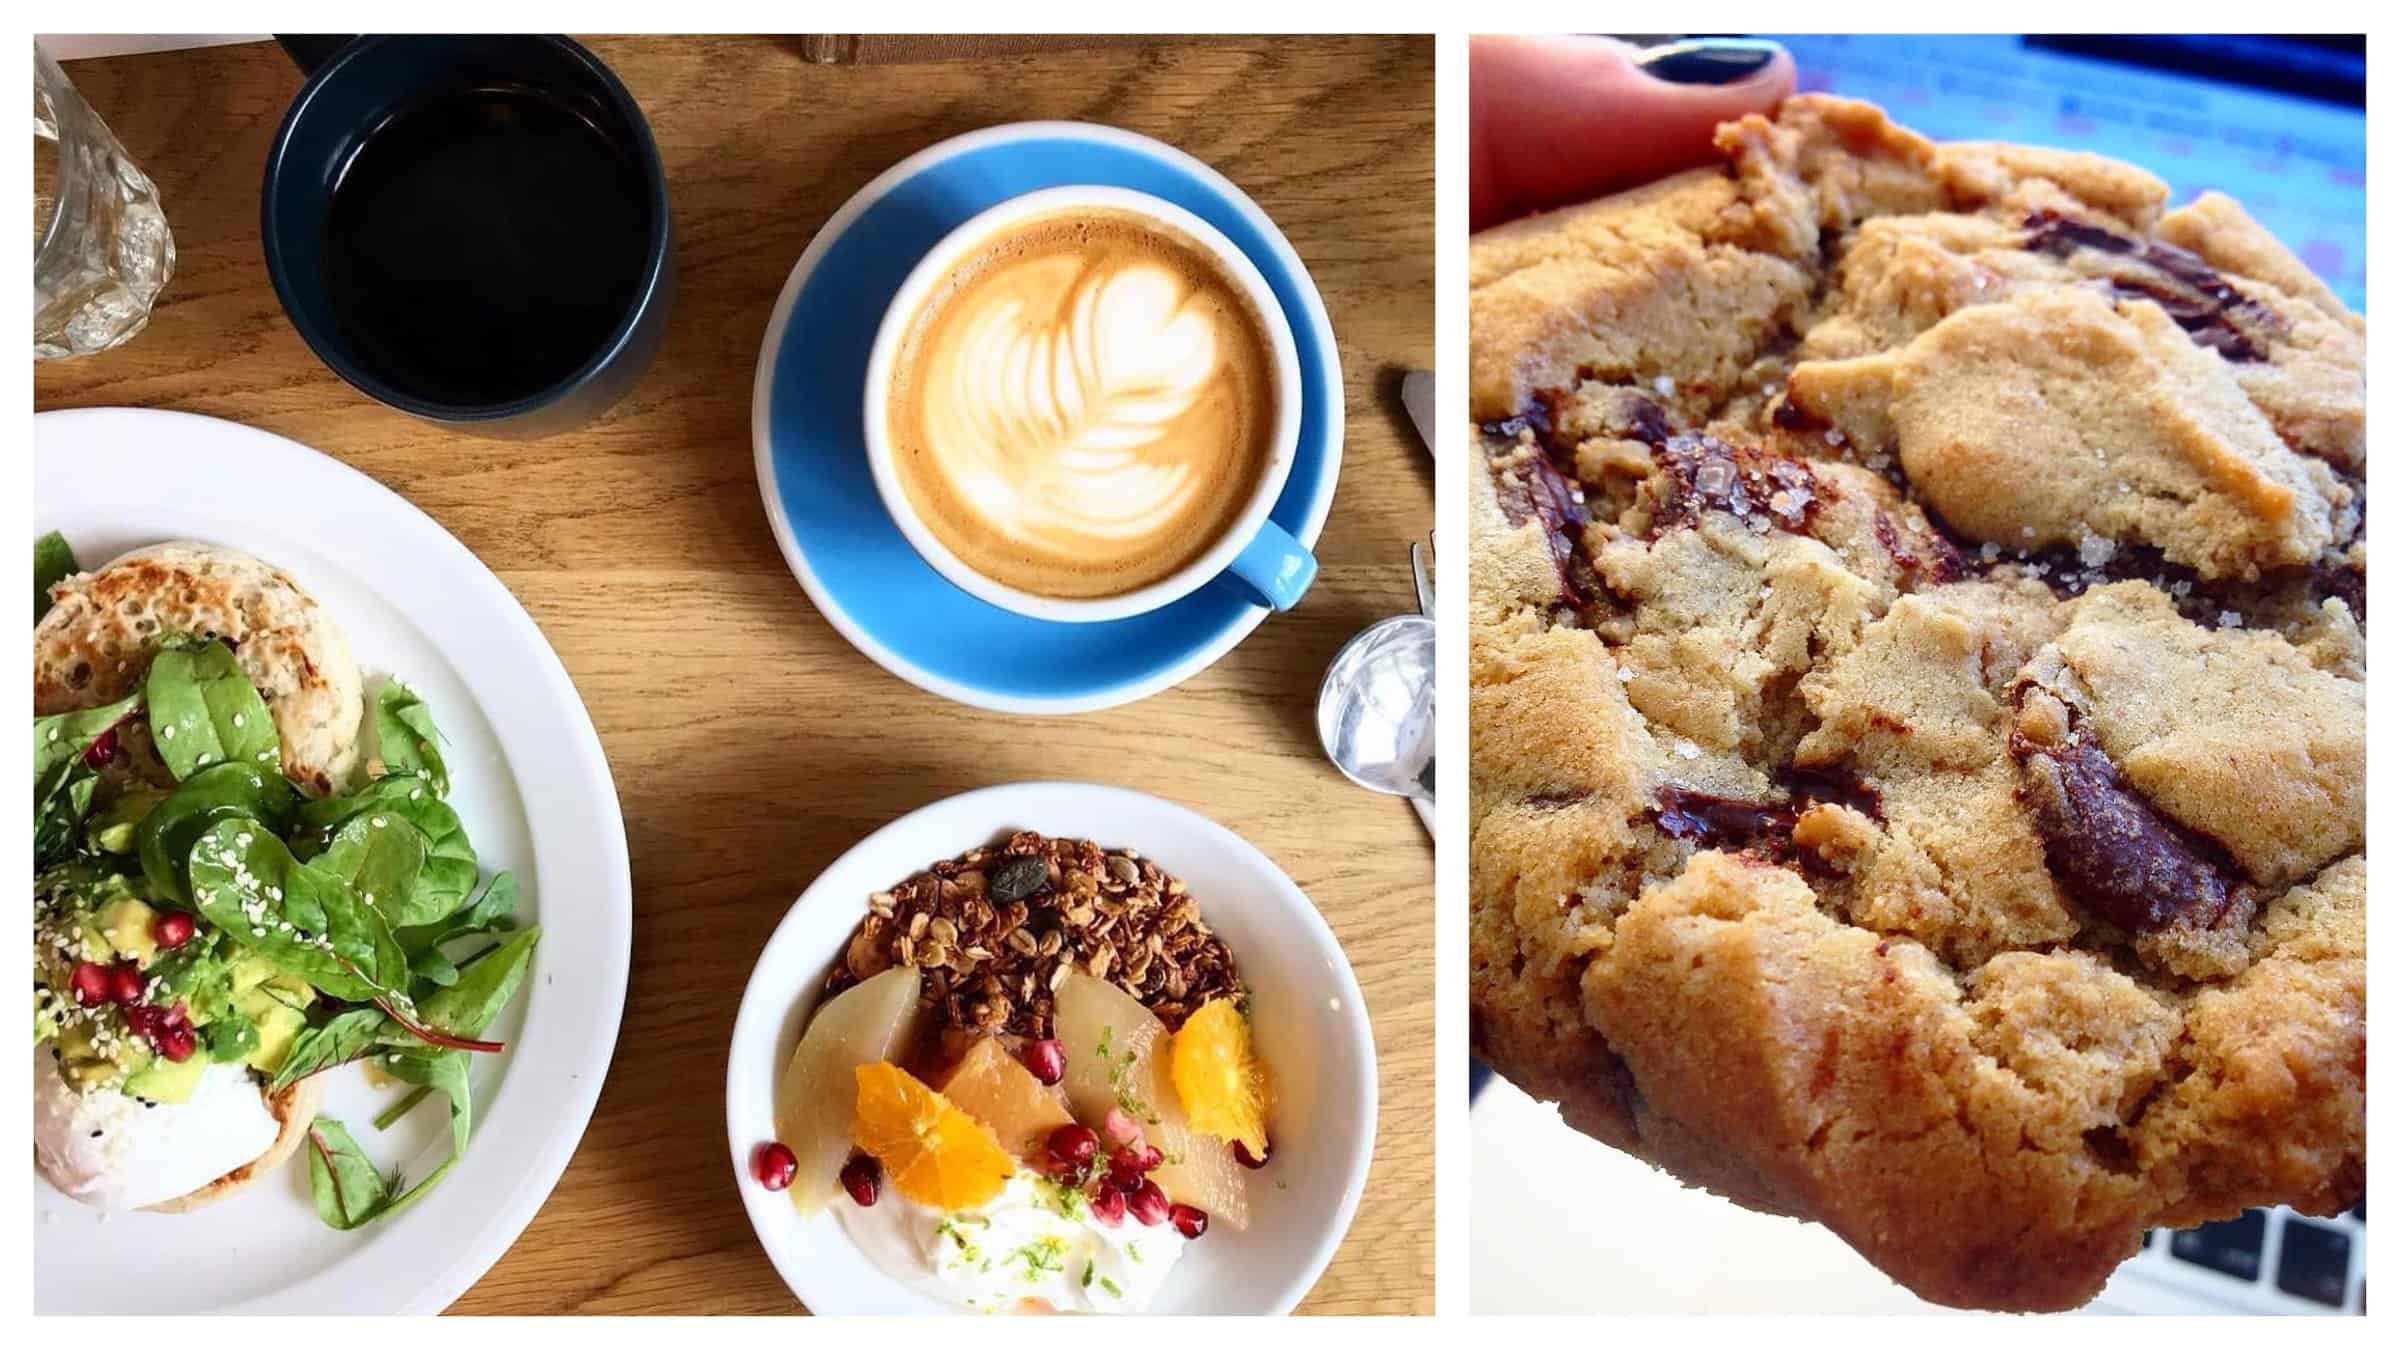 A go-to coffee shop for breakfast in Paris, Neighbours serves great homemade salads, pancakes, granola and coffee (left), as well as gooey chocolate-chip cookies (right).